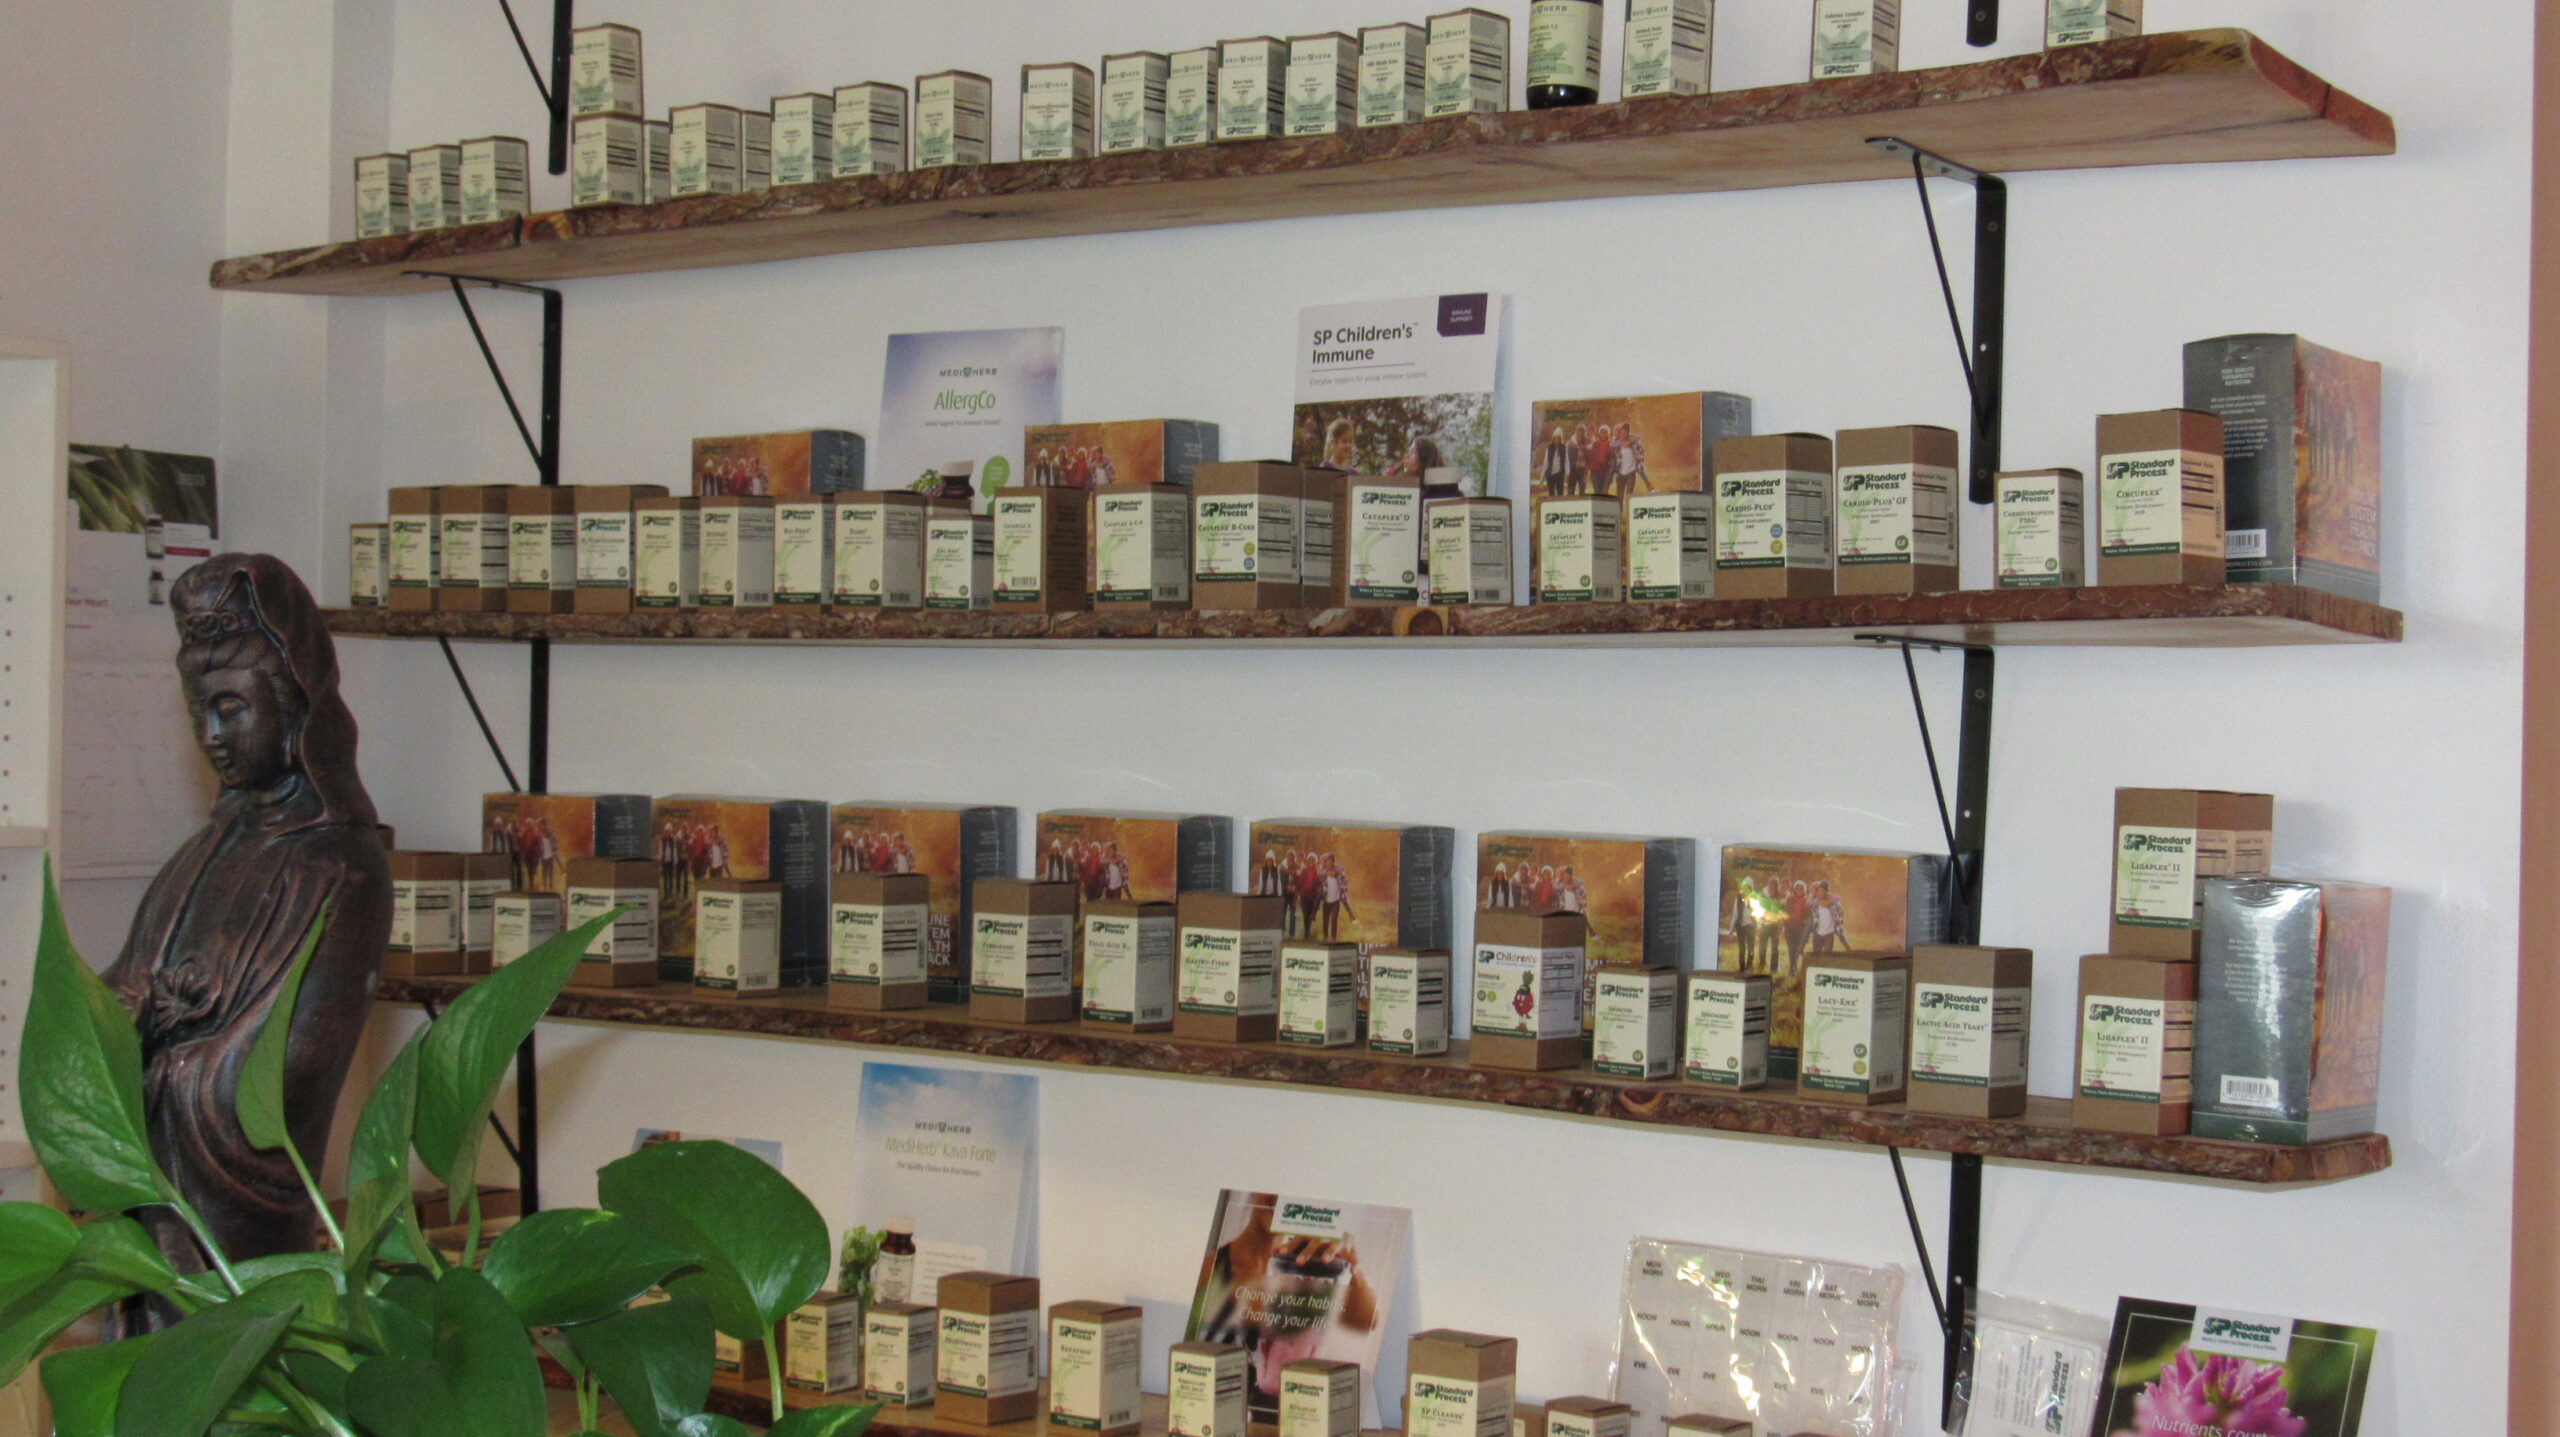 Standard Process and MediHerb supplements on the selves at Bahan Natural Health Center in Lakewood, Ohio.